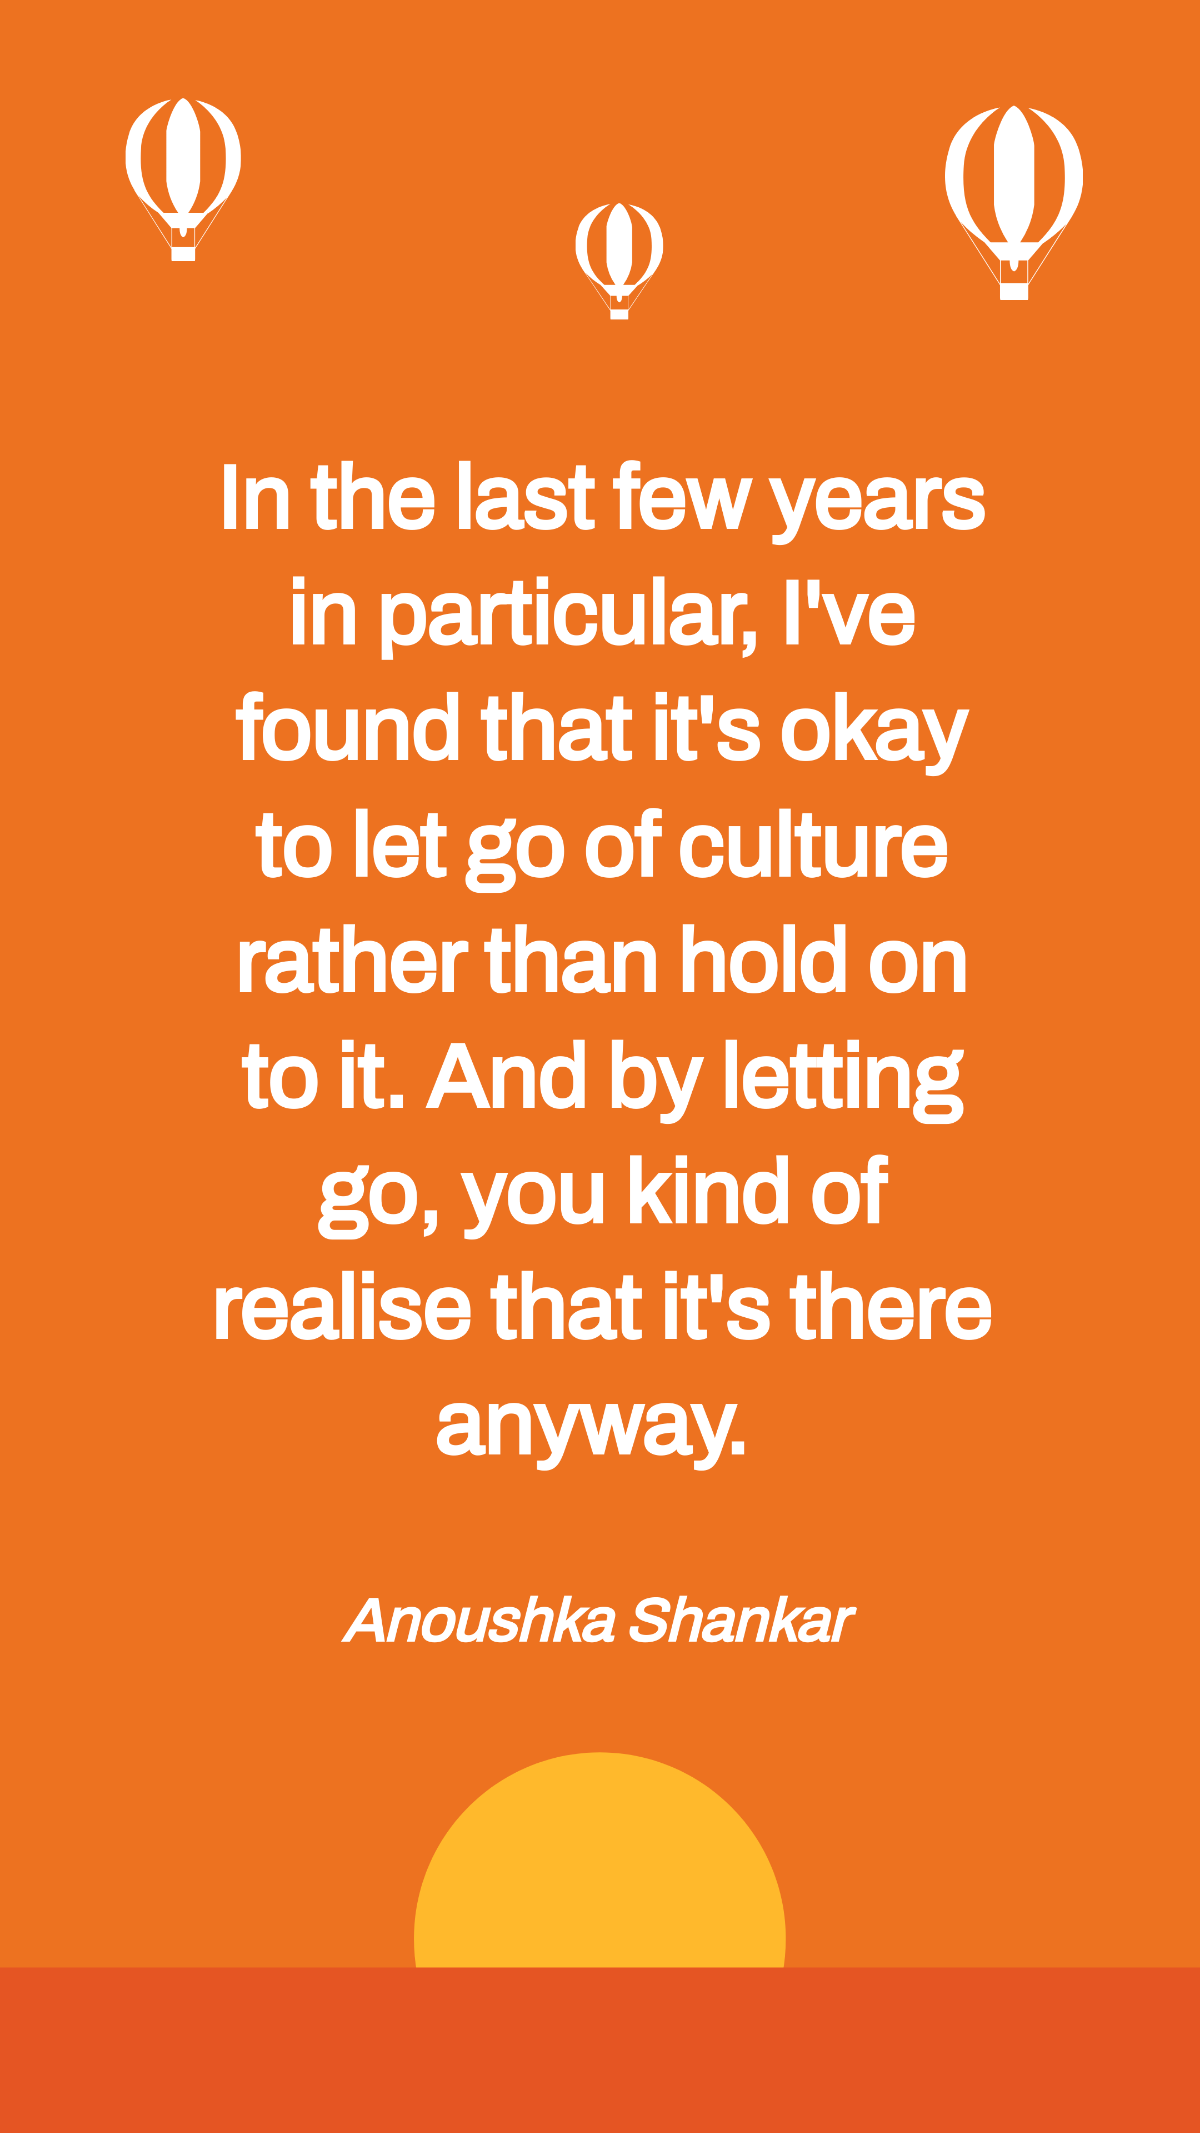 Free Anoushka Shankar - In the last few years in particular, I've found that it's okay to let go of culture rather than hold on to it. And by letting go, you kind of realise that it's there anyway.  Templa